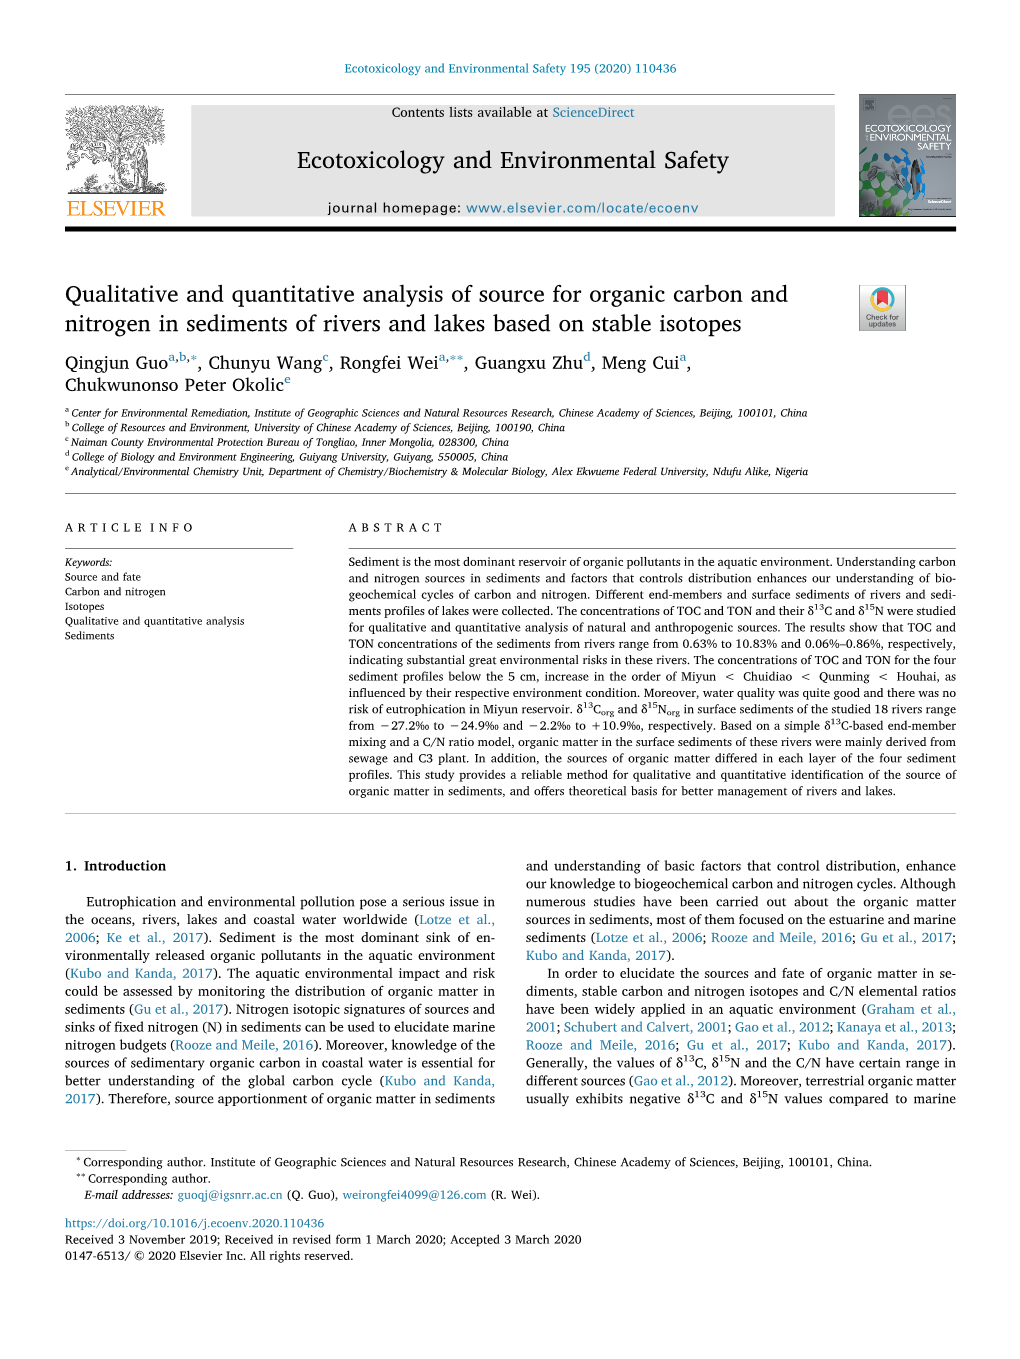 Qualitative and Quantitative Analysis of Source for Organic Carbon and Nitrogen in Sediments of Rivers and Lakes Based on Stable Isotopes T